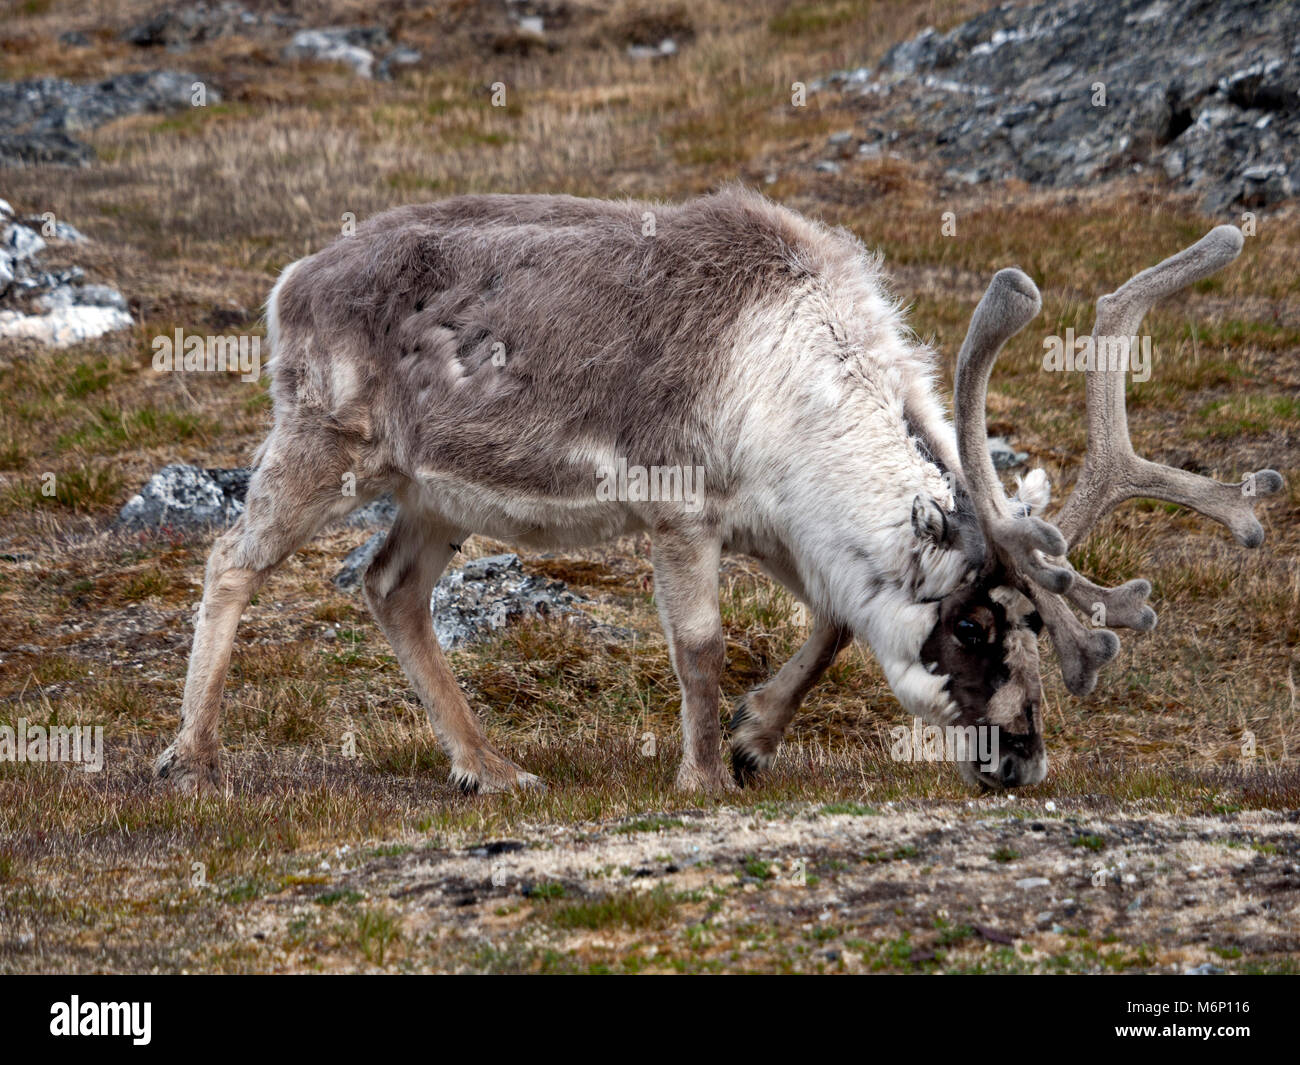 Wild native reindeer on the plateau of Alkhornet, Svalbard, Spitsbergen in the Arctic Circle, part of Norway.  Covered in glaciers and fjords. Stock Photo